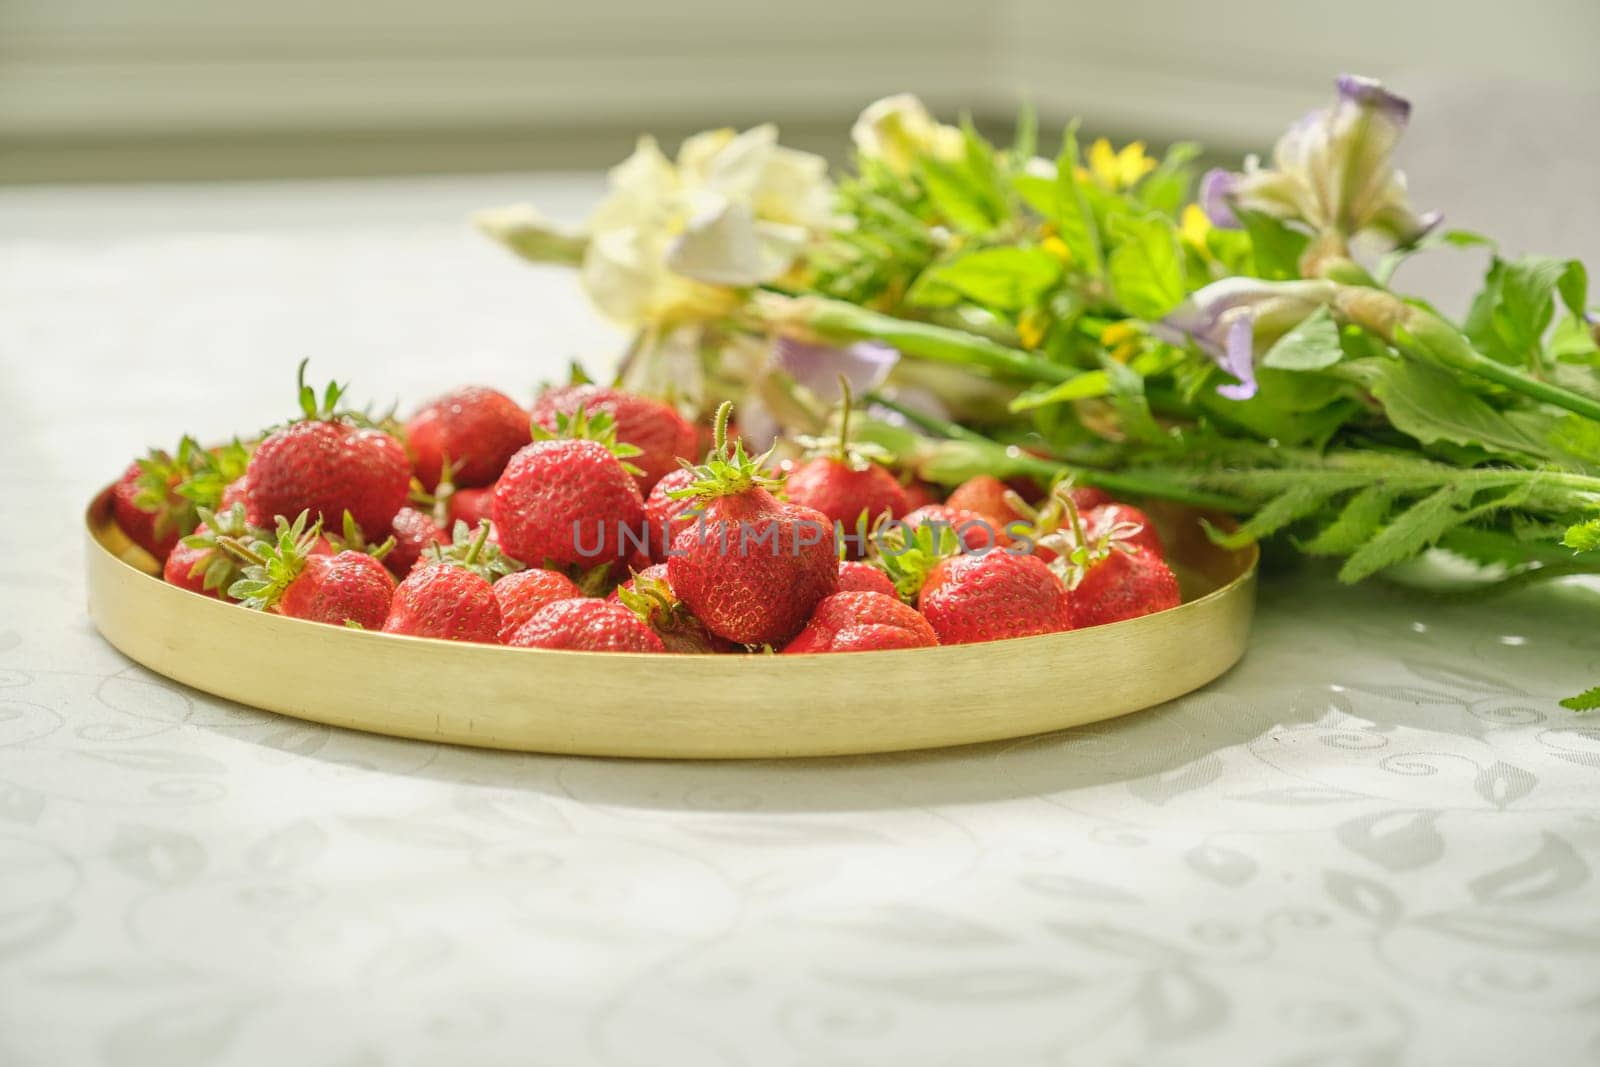 Berries of red ripe strawberry on white table in golden tray, natural vitamins in spring season, healthy eating. Bouquet of flowers lying near strawberries